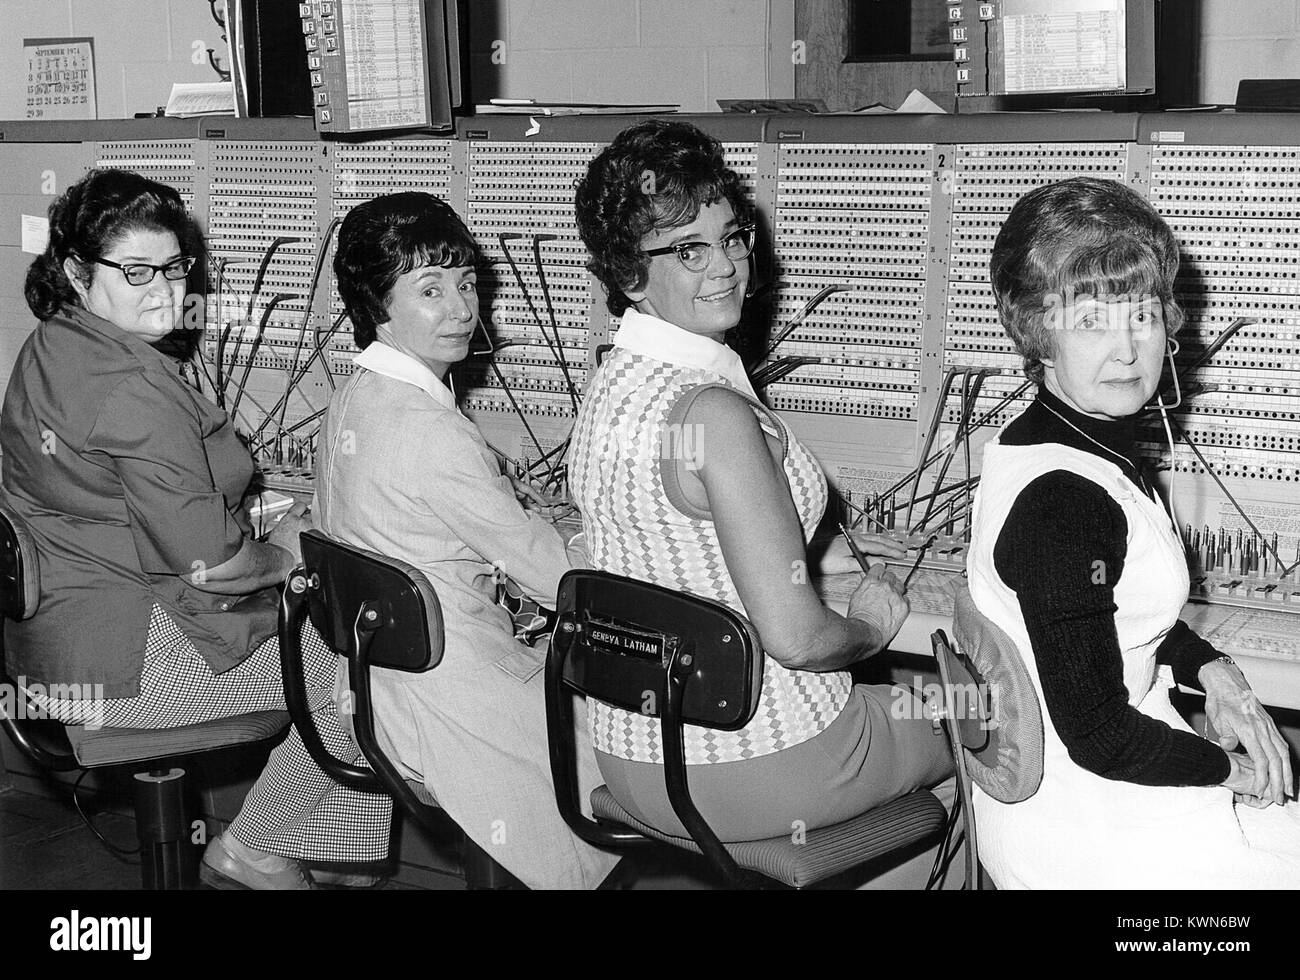 Telephone operator switchboard Black and White Stock Photos & Images - Alamy